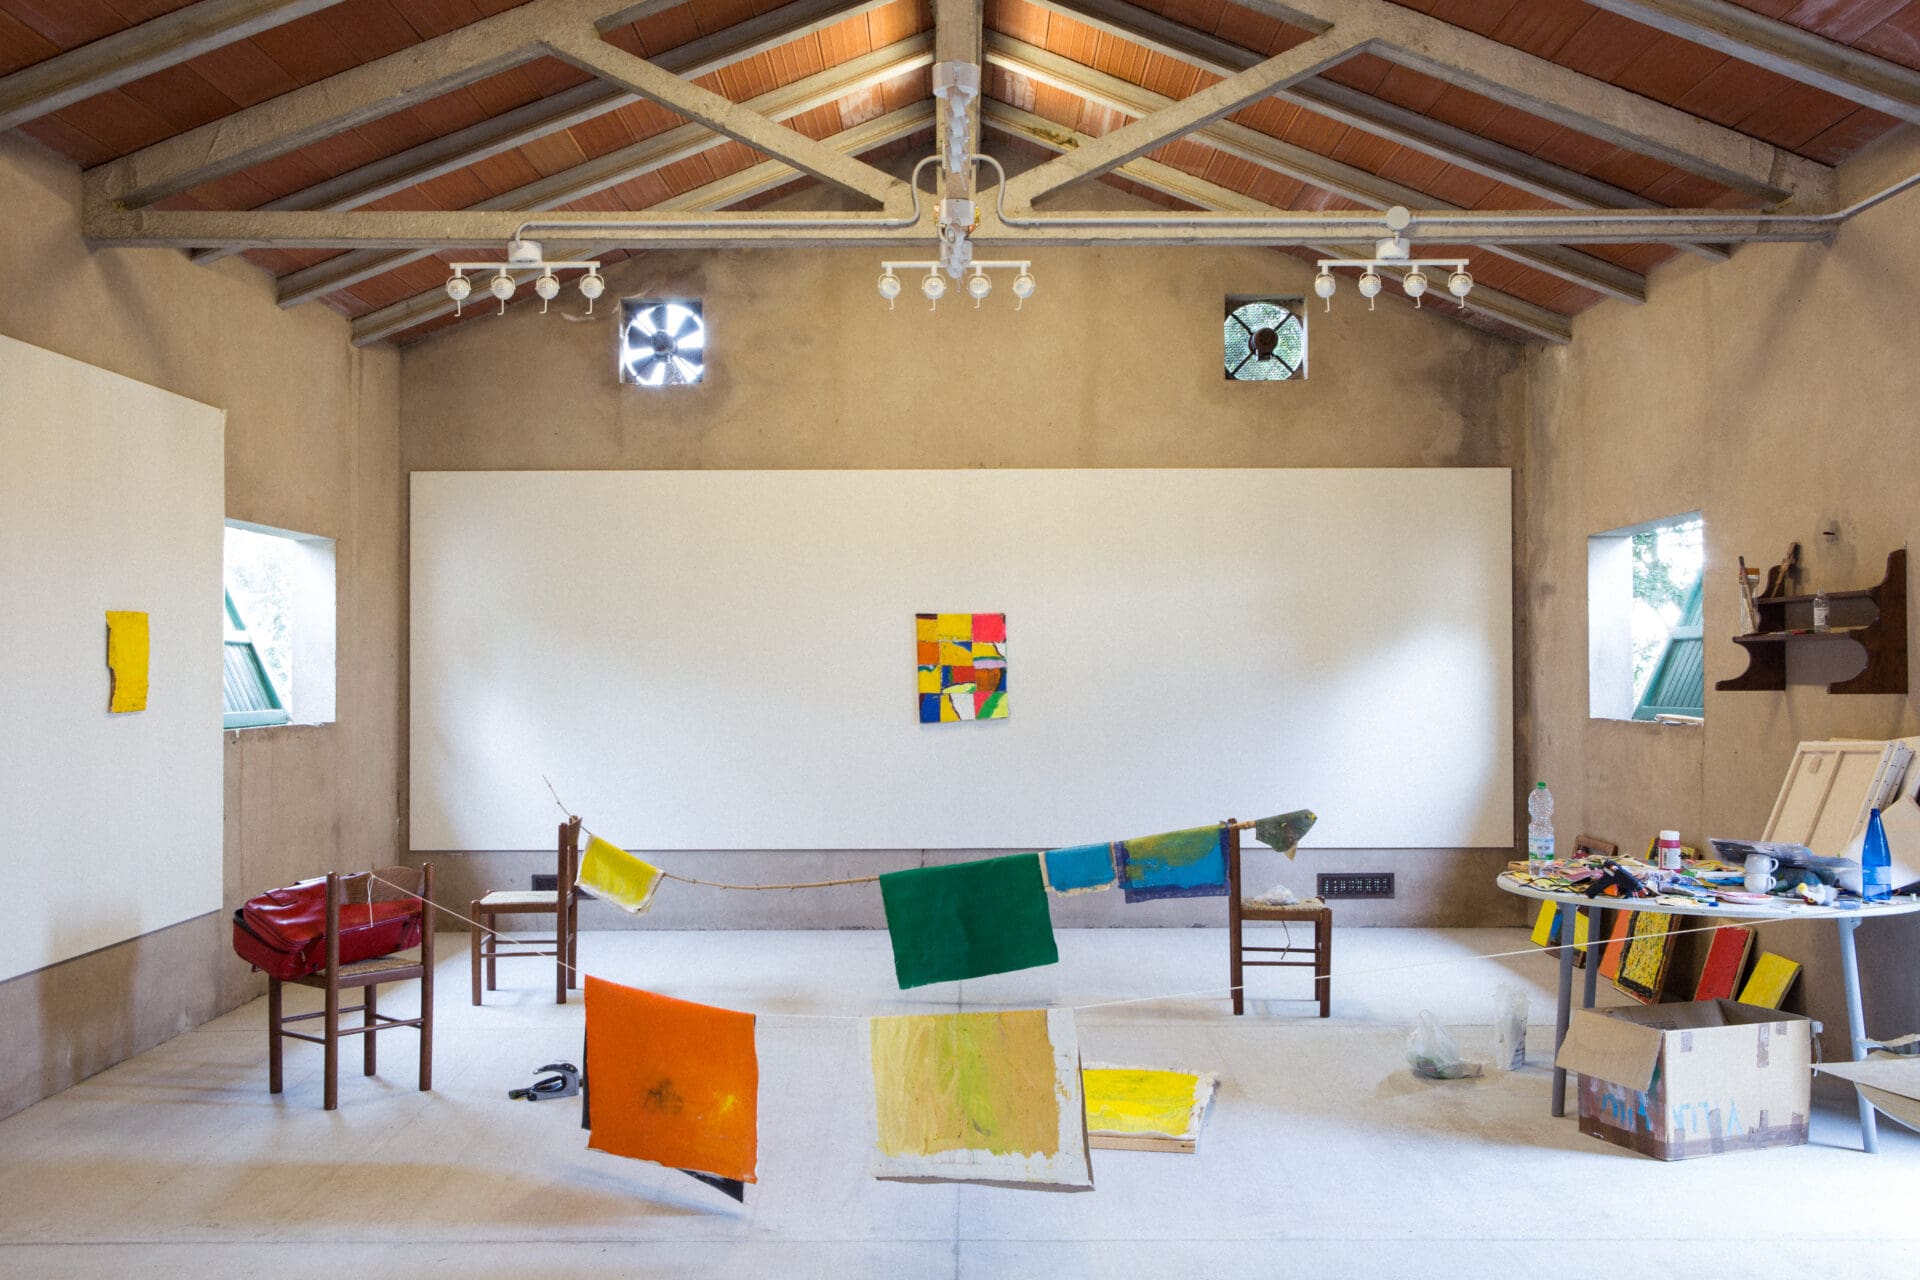 Inside Villa Lena: an art retreat and hotel in the Tuscan hills | One of the studios available to resident artists at Villa Lena